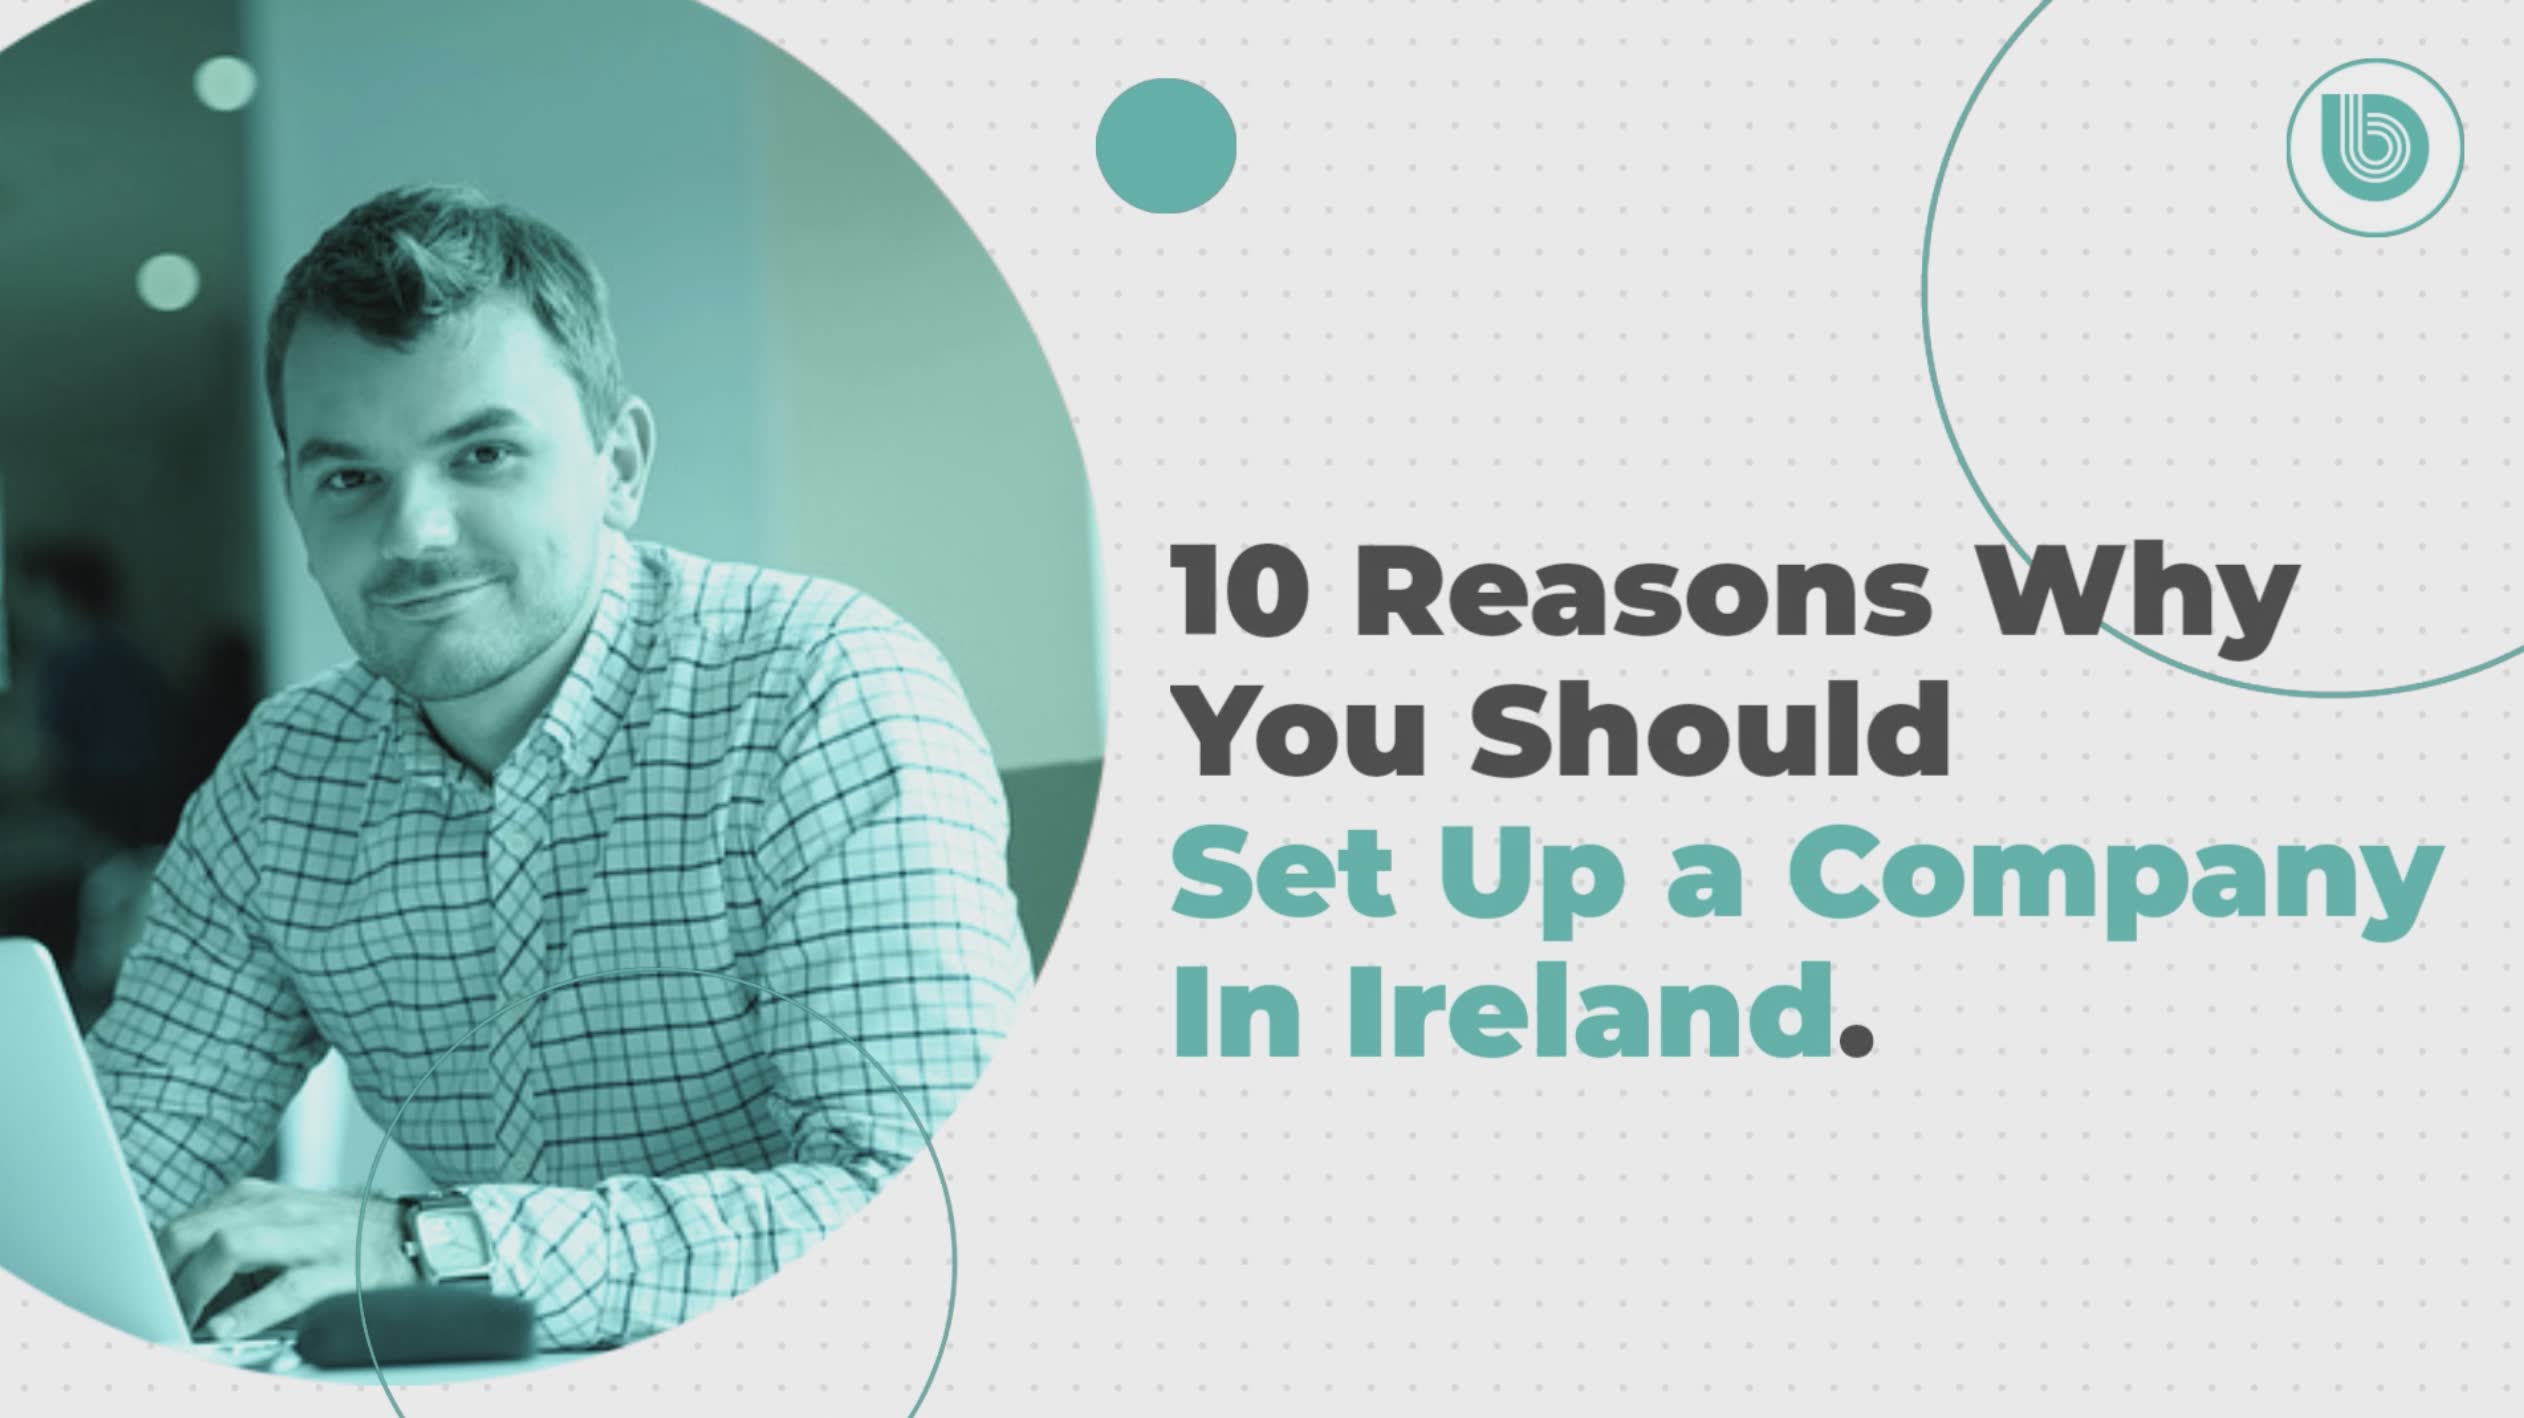 11 Benefits of Company Formation in Ireland for Overseas Business: A Guide to Tax Benefits and More 7